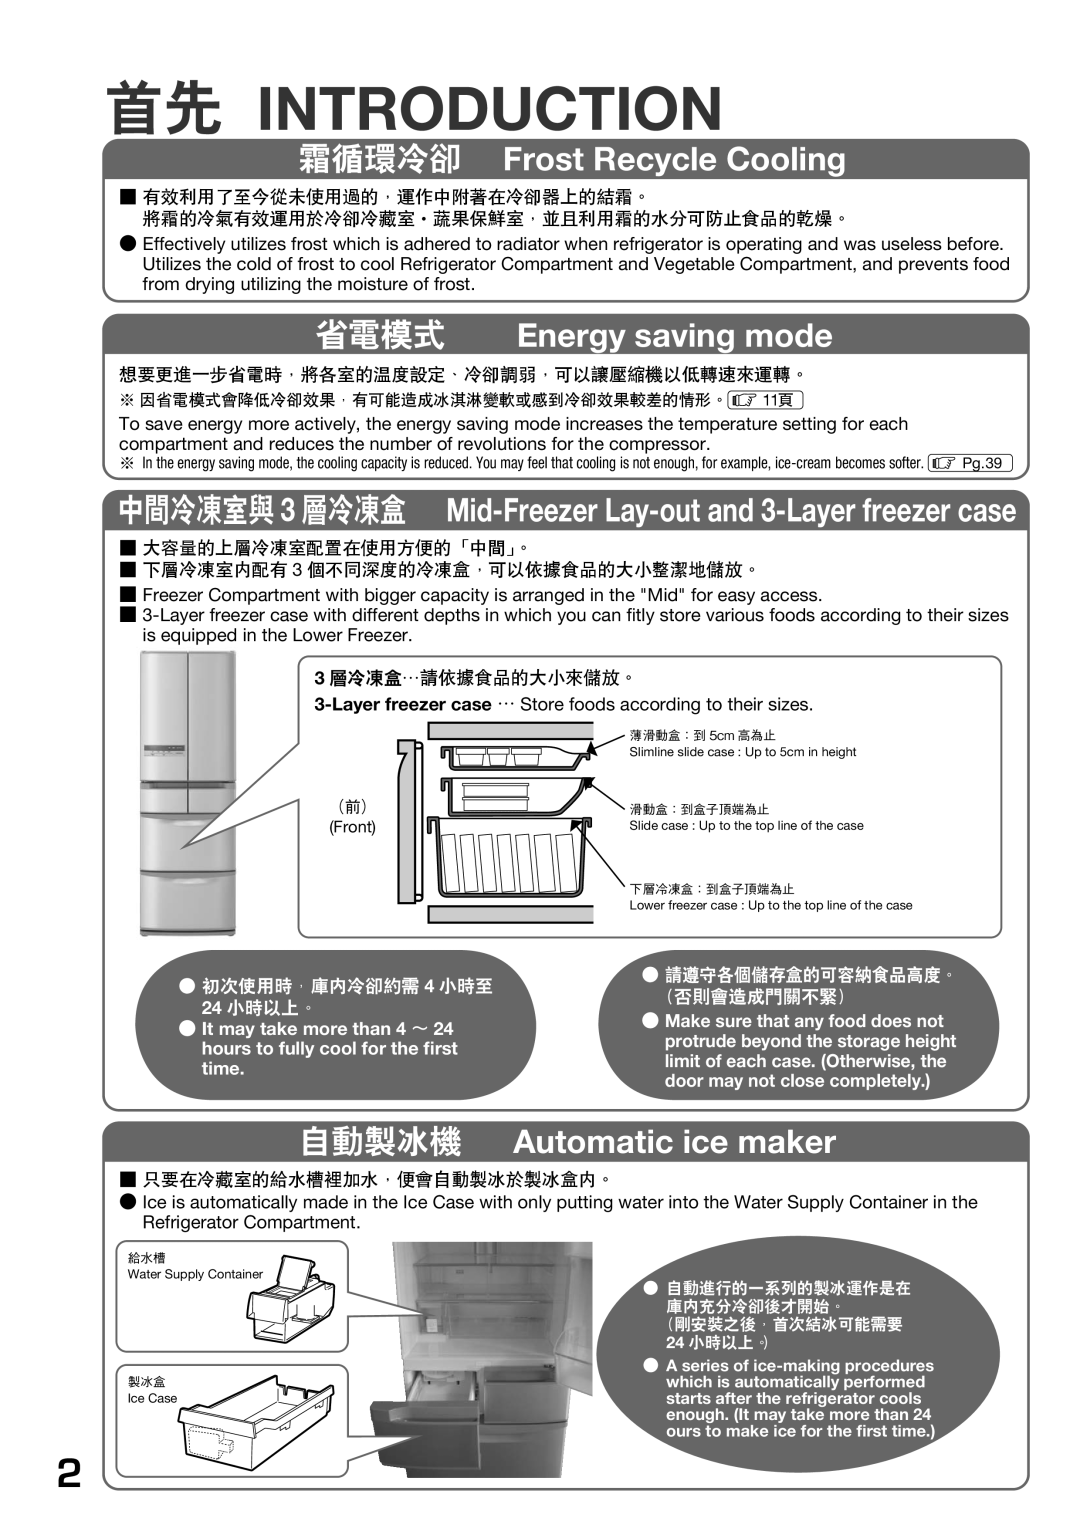 Hitachi r-sf42bms operation manual 霜循環冷卻 Frost Recycle Cooling, 省電模式 Energy saving mode, 自動製冰機 Automatic ice maker 